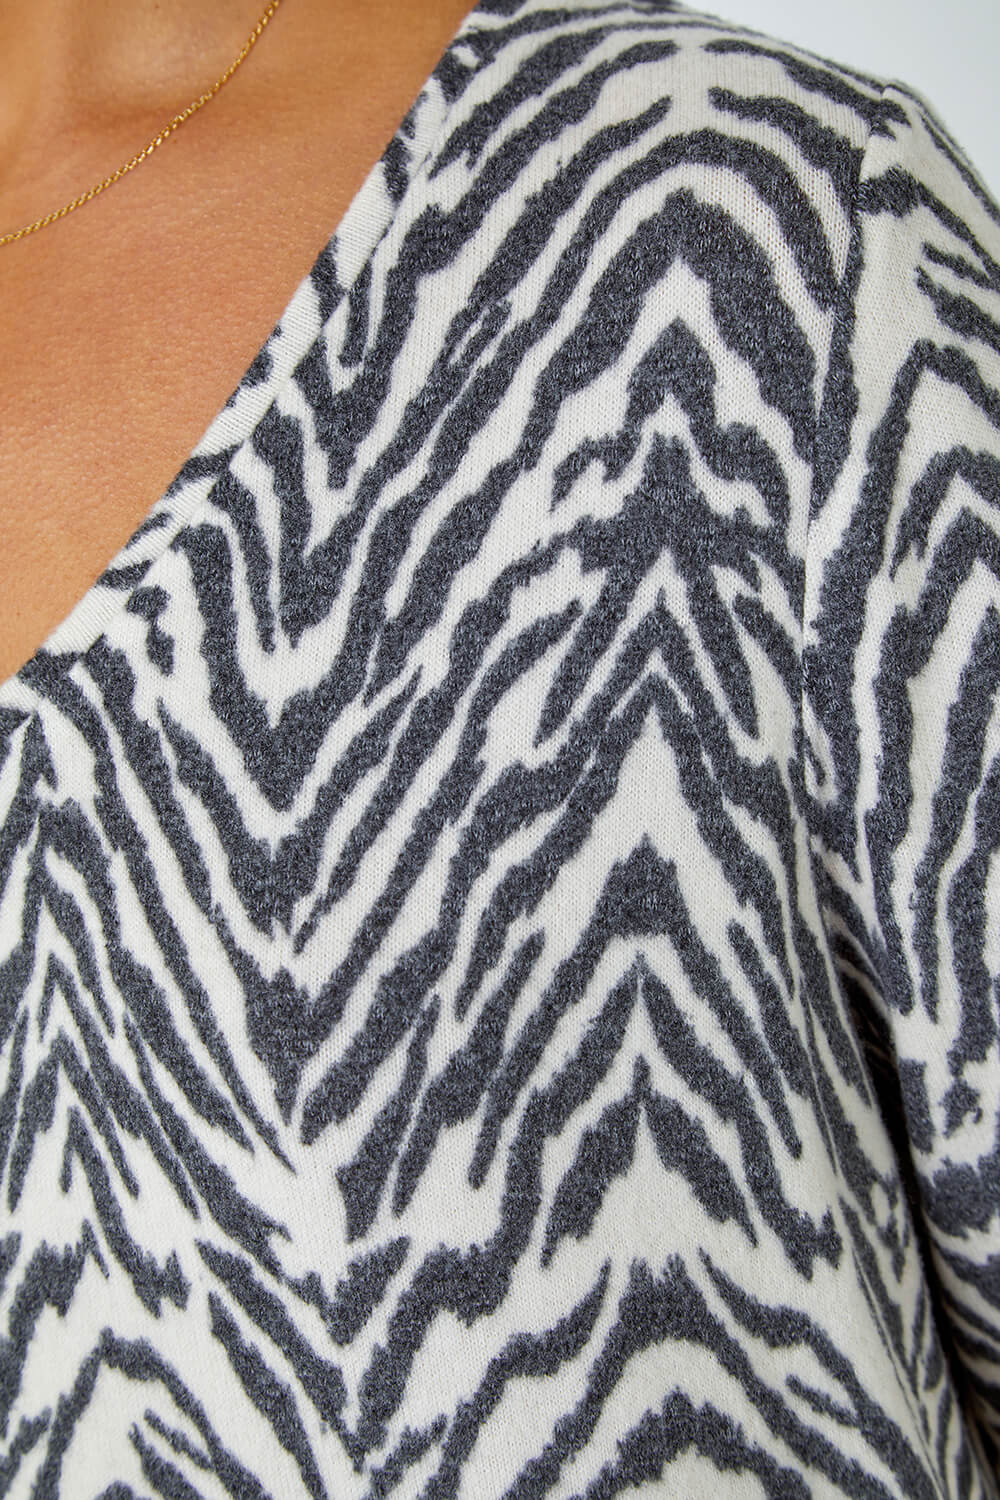 Grey Soft Touch Animal Stretch Top, Image 5 of 5